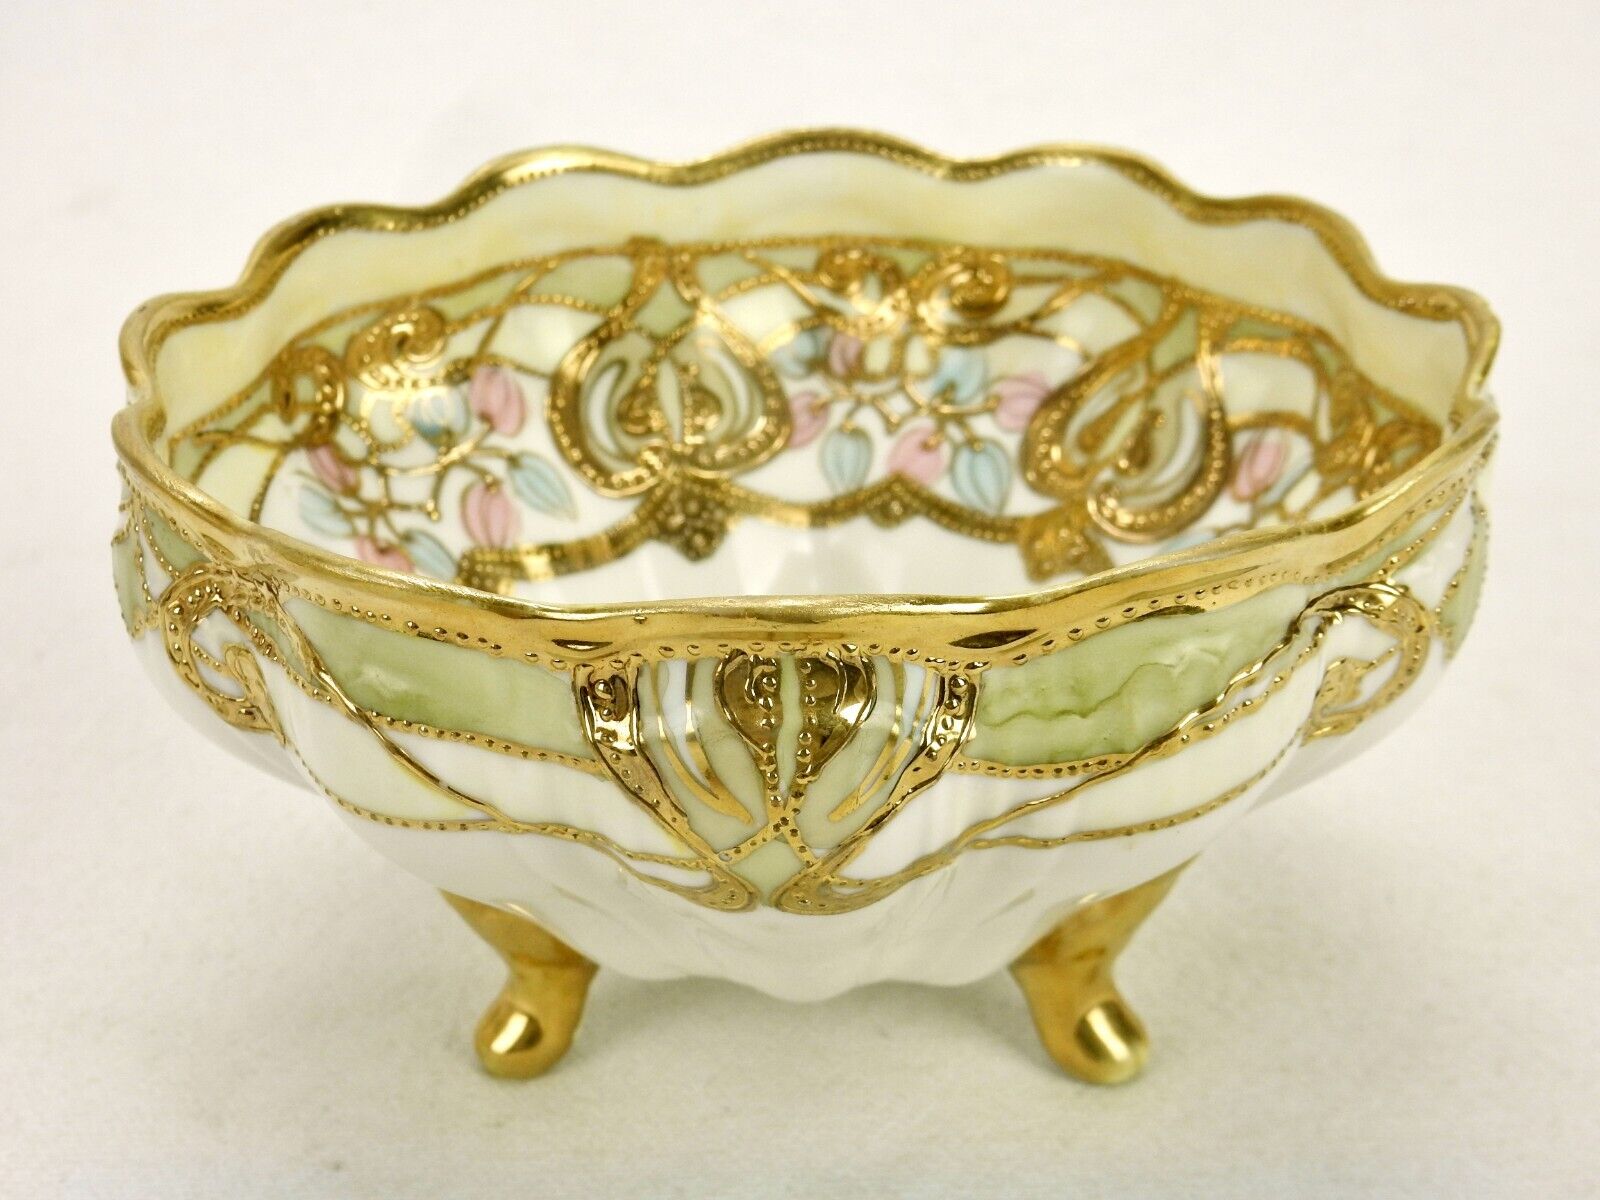 Noritake RC Nippon Footed Bowl, Ornate Floral, Heavy Gilding, Ribbed & Scalloped